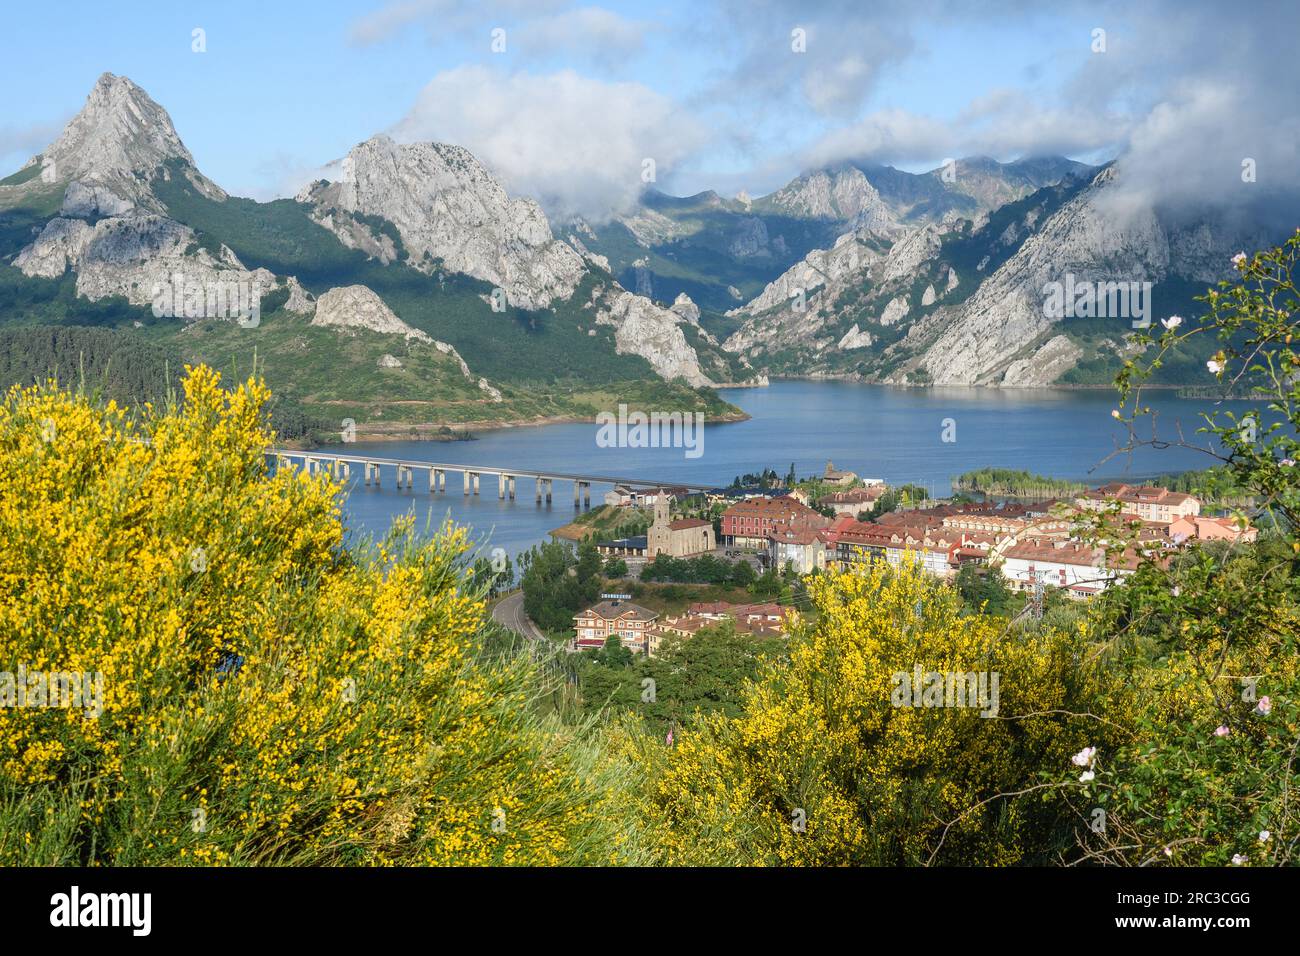 Panoramic view of the Riaño reservoir surrounded by limestone mountains Stock Photo